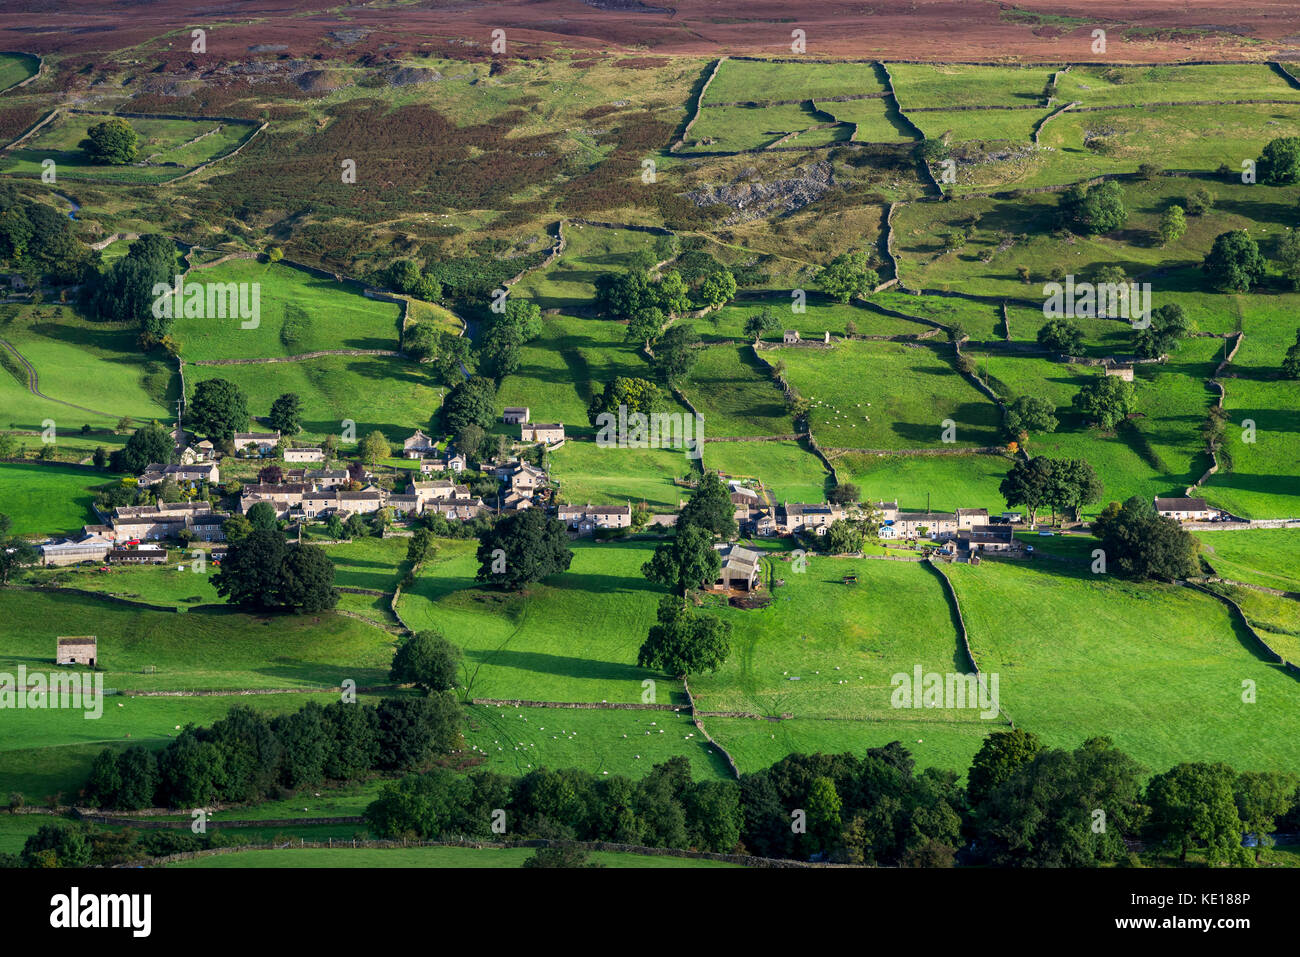 Das Dorf healaugh in swaledale, Yorkshire Dales National Park, England. Stockfoto